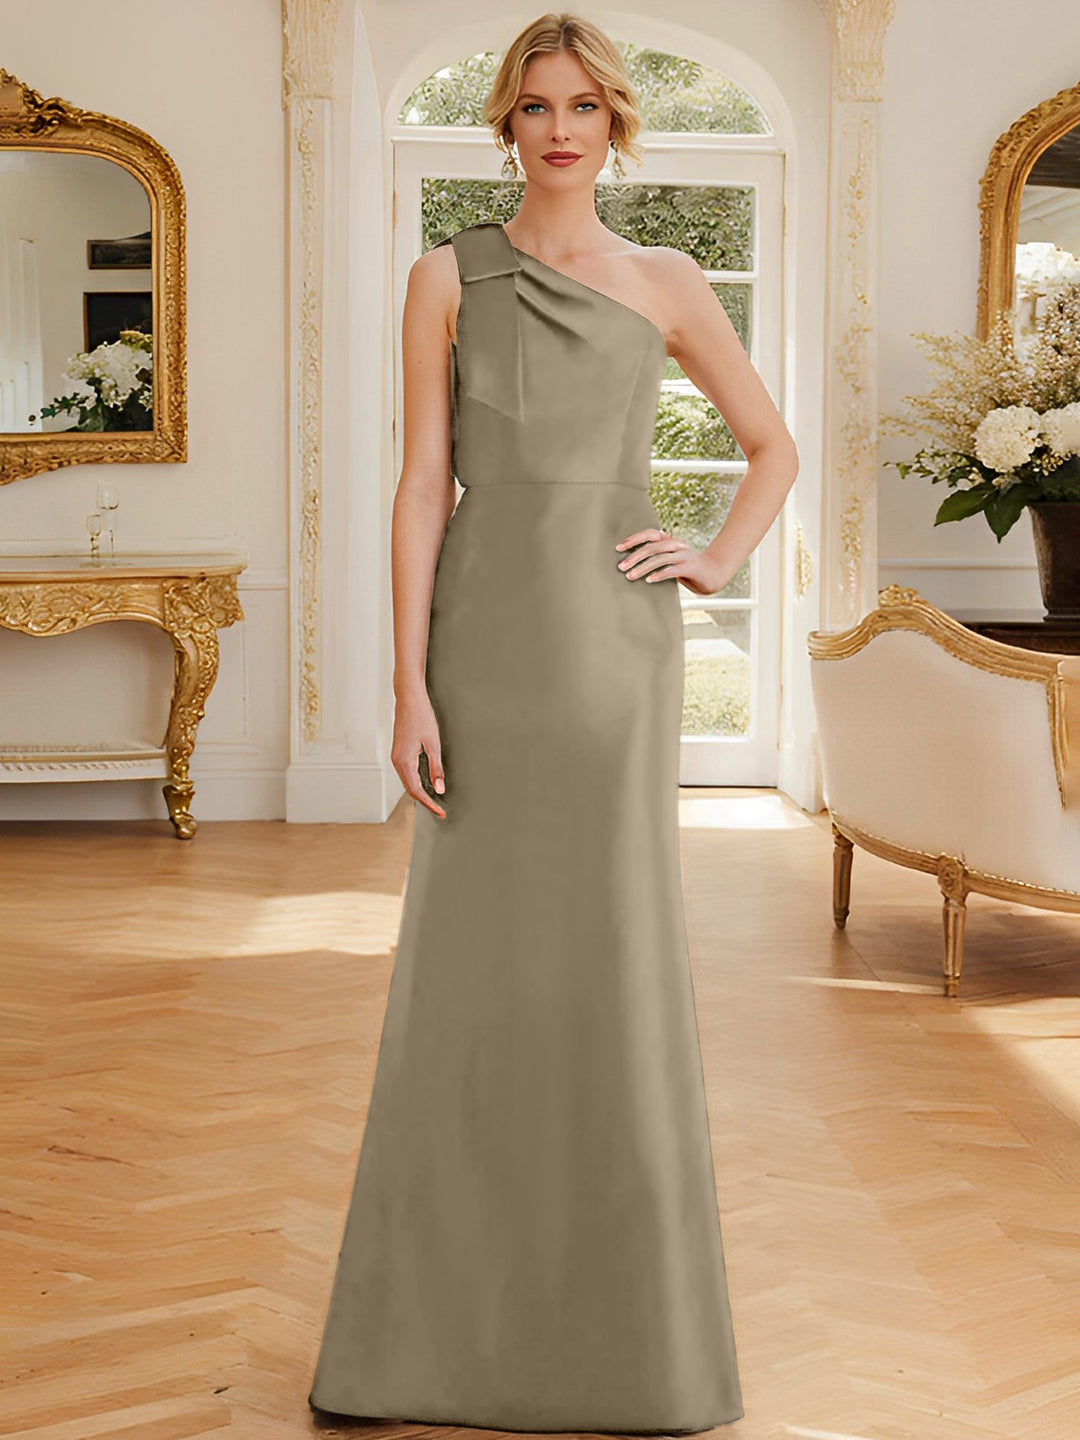 Sheath/Column One-Shoulder Sleeveless Satin Mother of the Bride Dresses with Bowknot